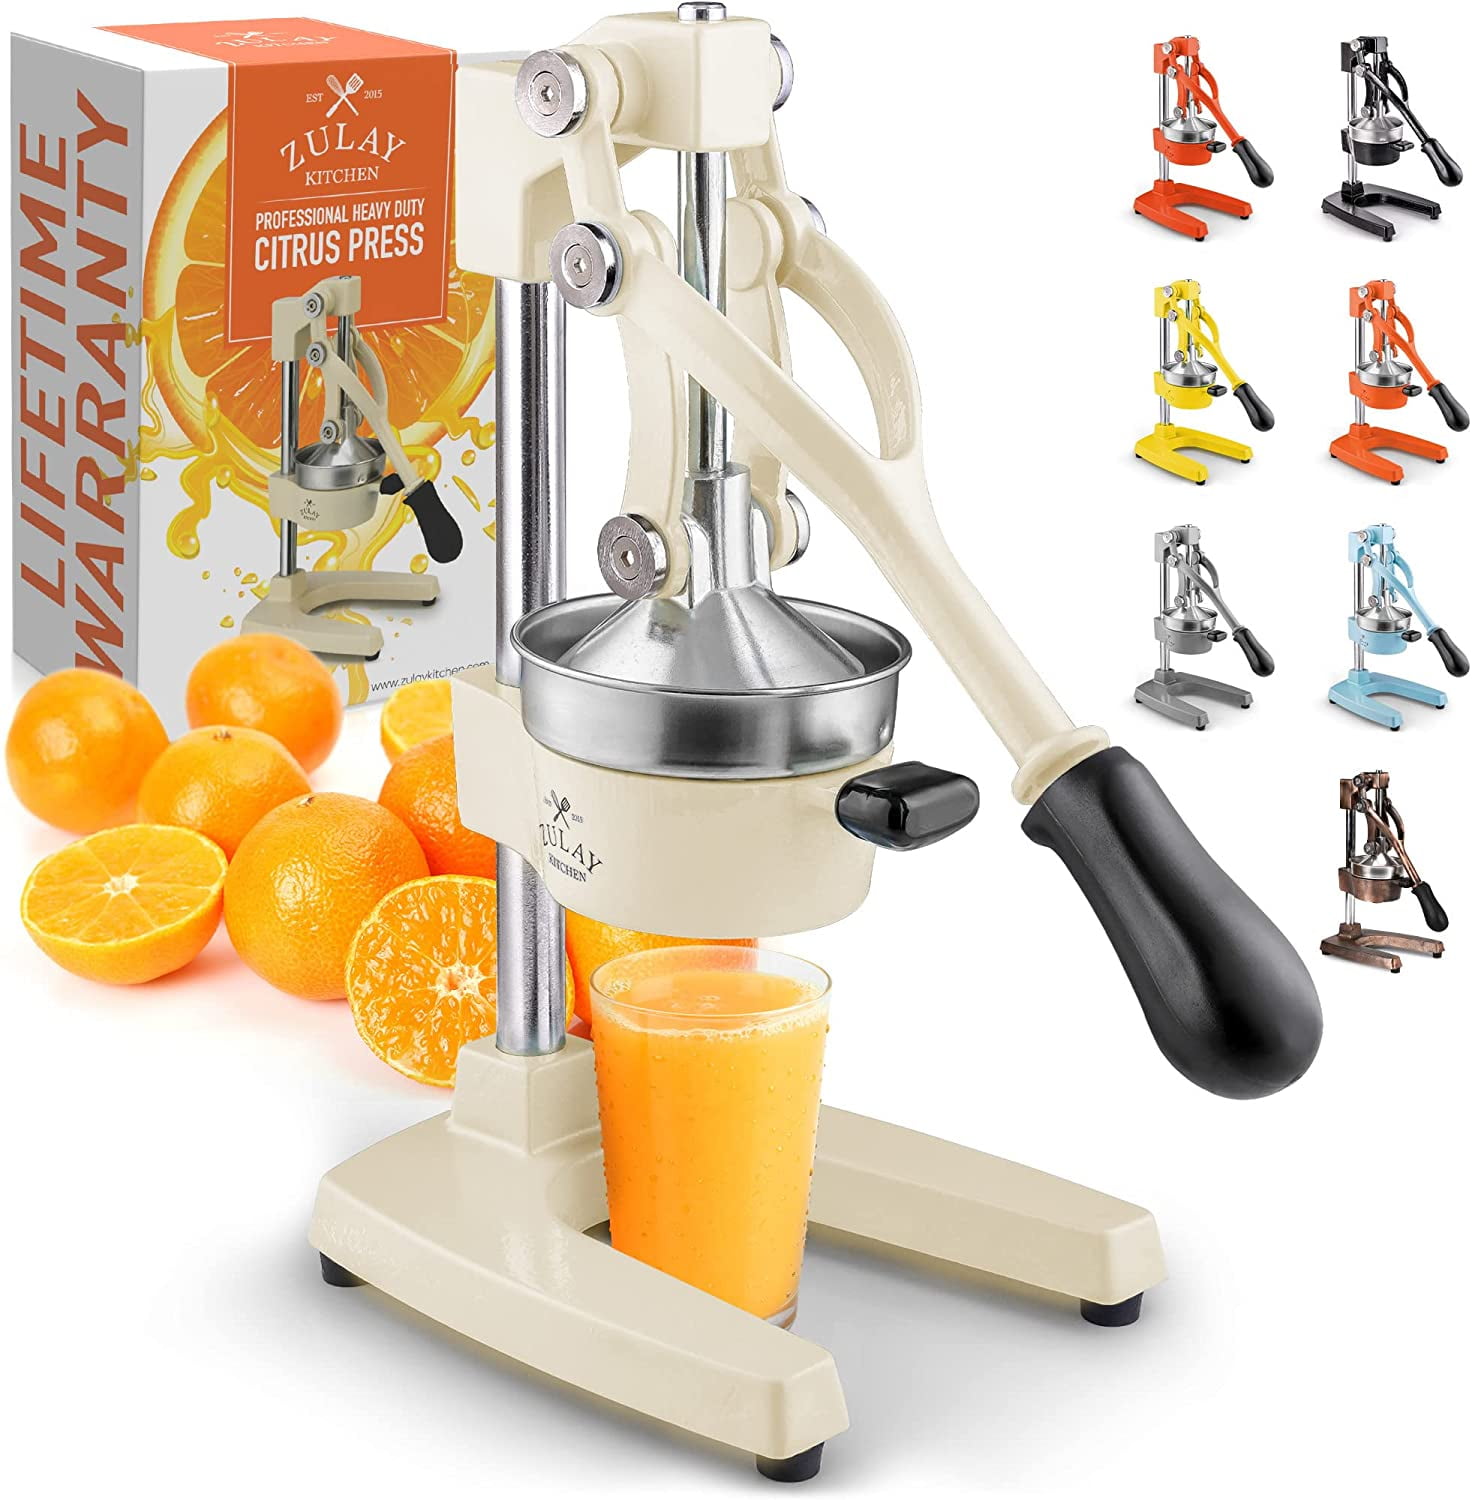  Zulay Kitchen Cast-Iron Orange Juice Squeezer - Heavy-Duty,  Easy-to-Clean, Professional Citrus Juicer - Durable Stainless Steel Lemon  Squeezer - Sturdy Manual Citrus Press & Orange Squeezer (Red): Home &  Kitchen